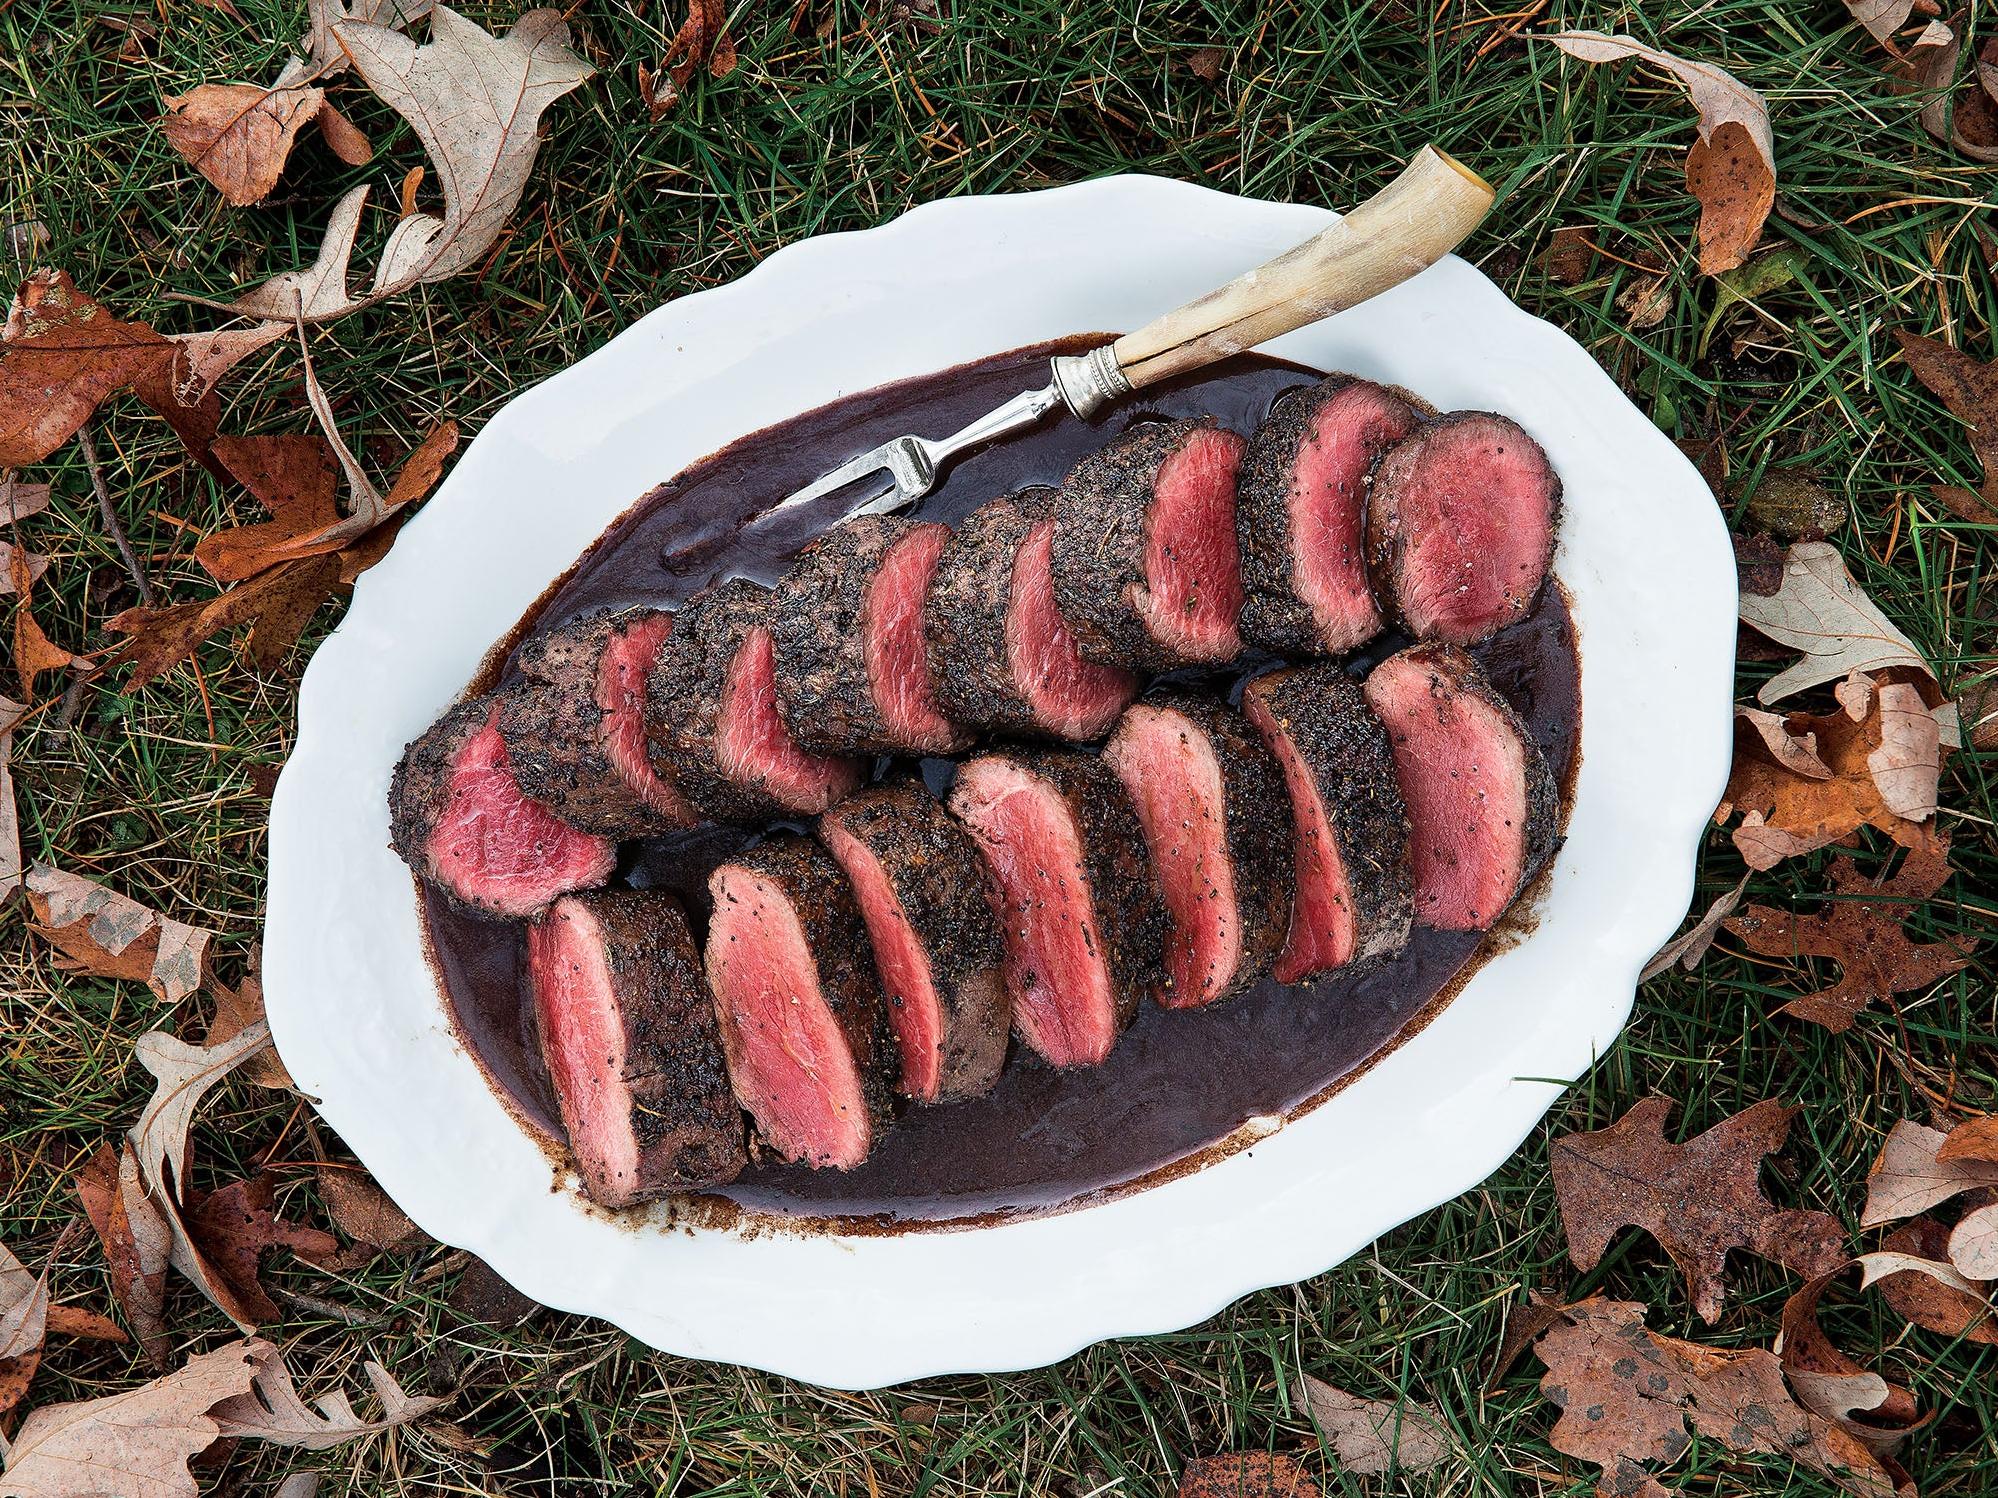  This venison tenderloin will melt in your mouth.